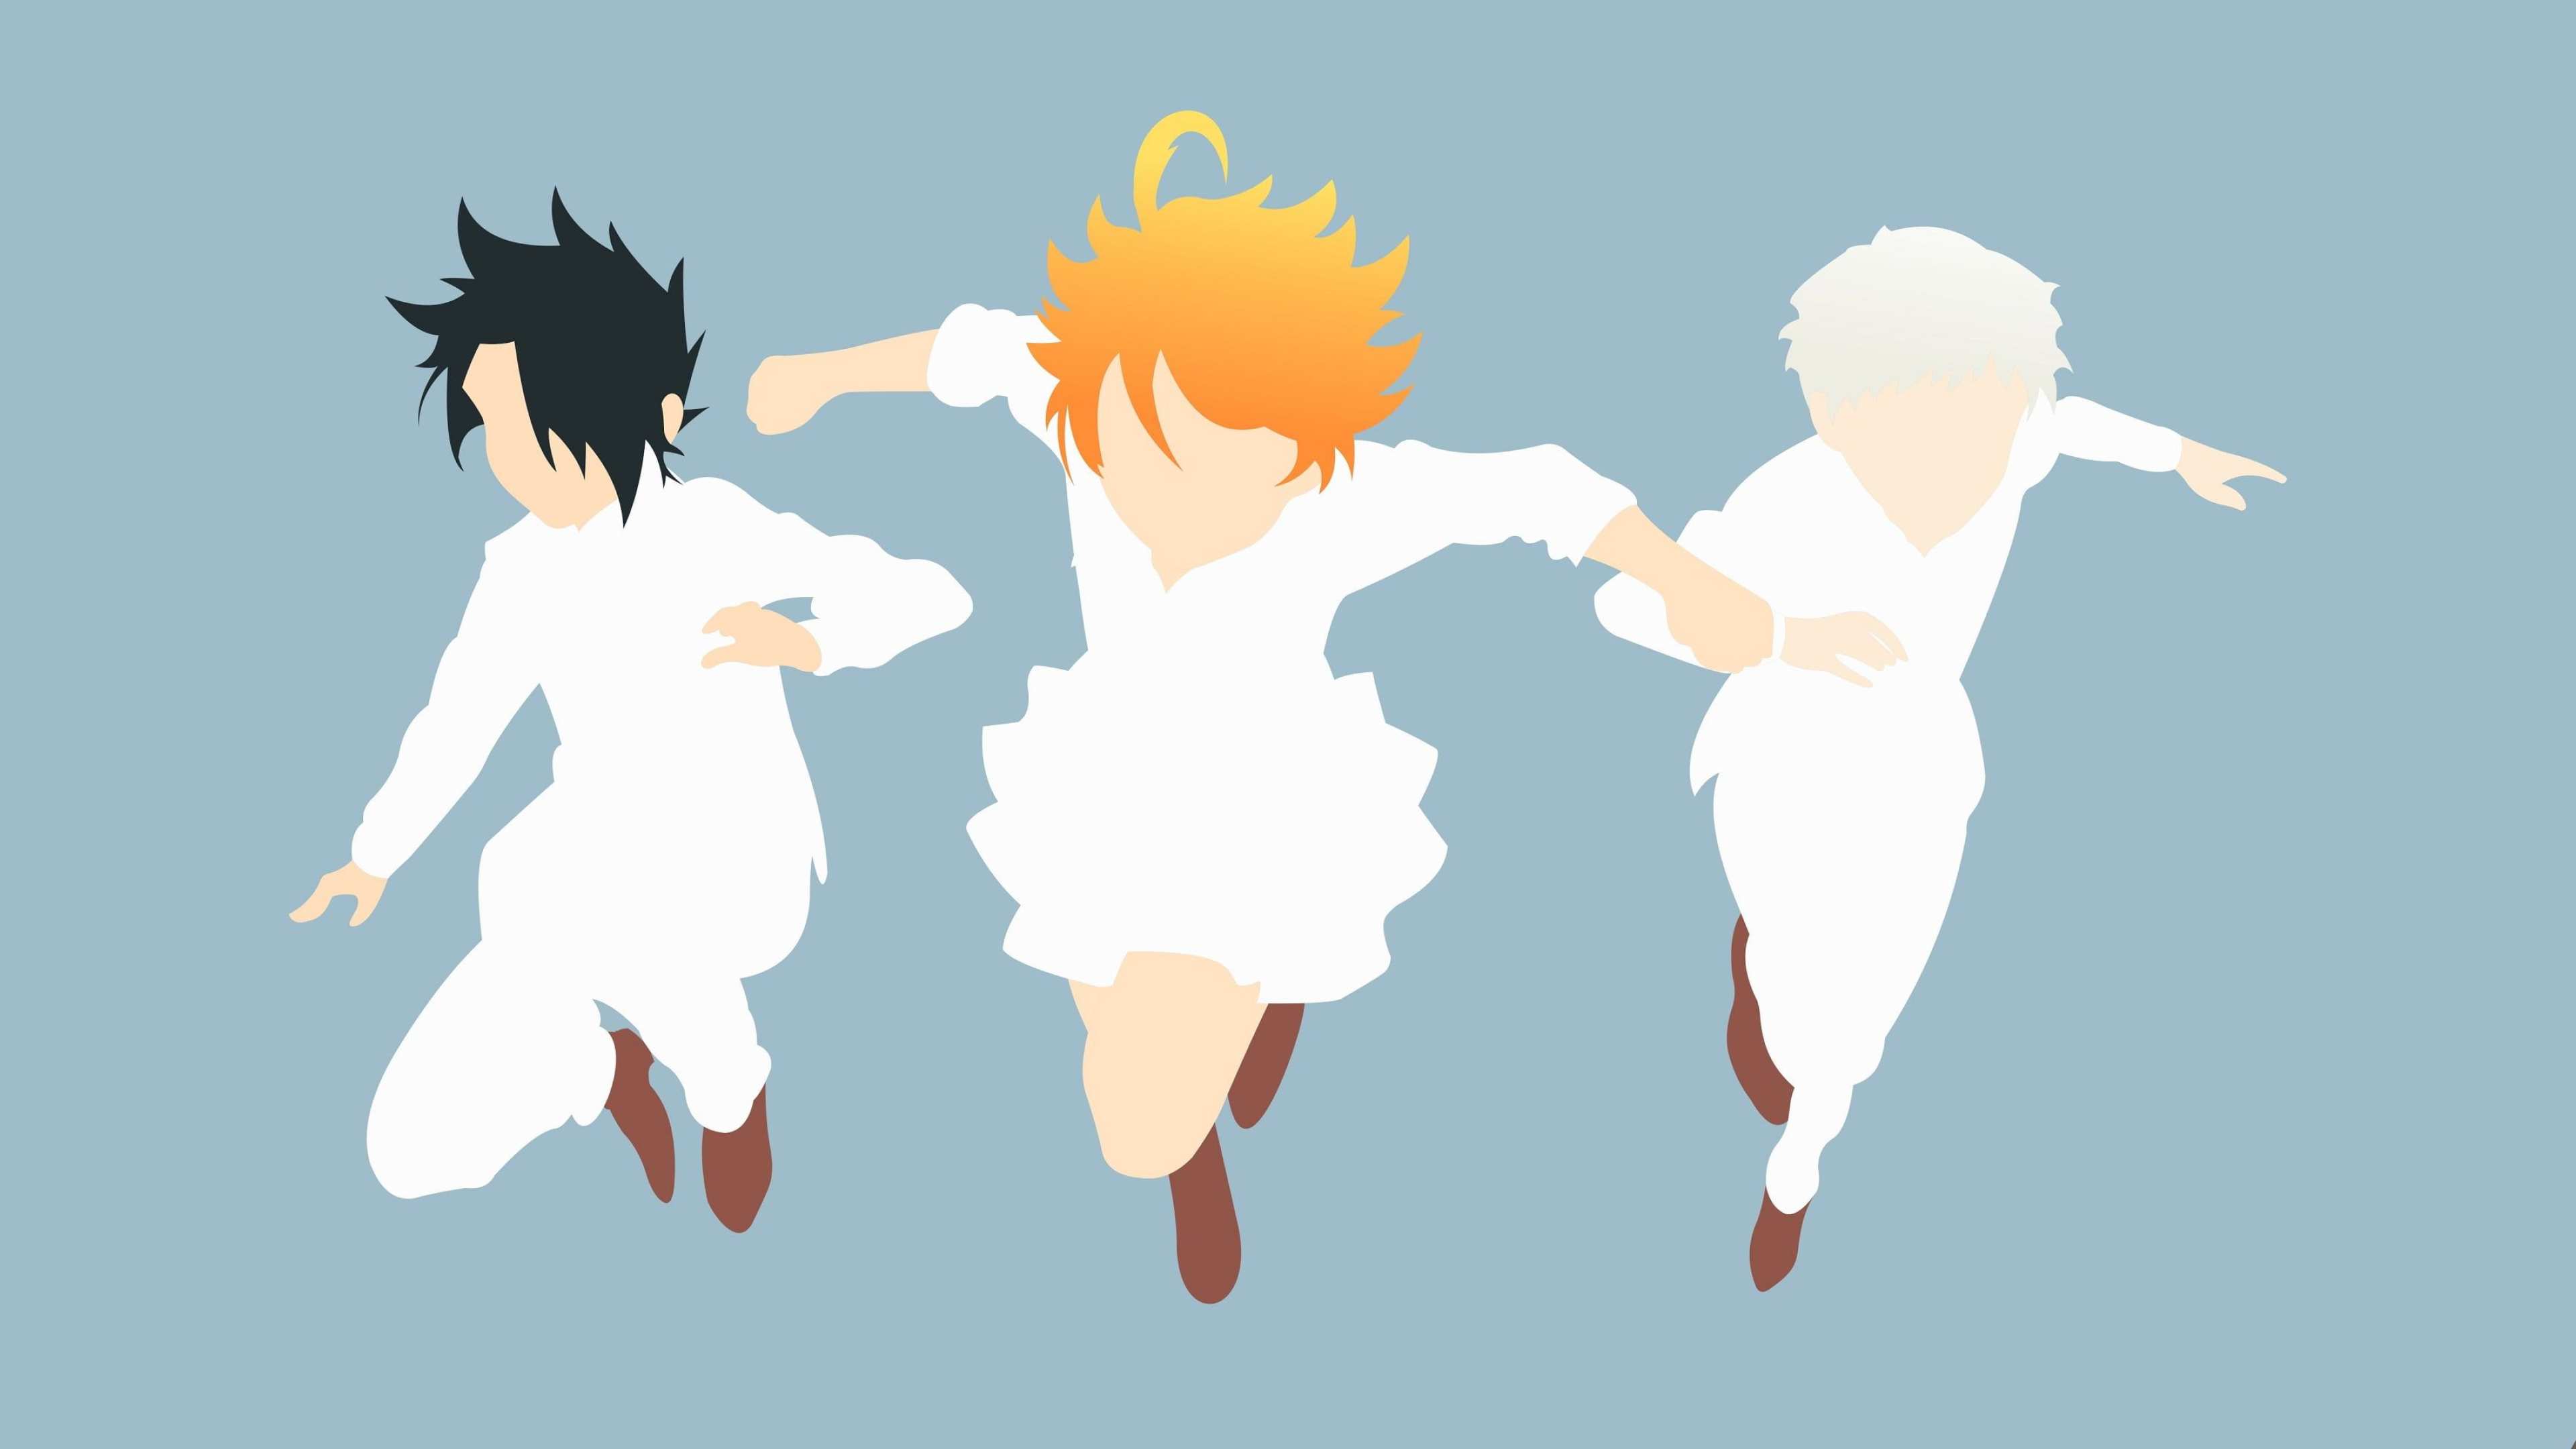 3840x2160 The promised neverland Norman (The Promised Neverland) Emma (The Promised Neverland) Ray (The Promised Neverland) #4K #wal&acirc;&#128;&brvbar; | Neverland, Neverland art, Anime canvas